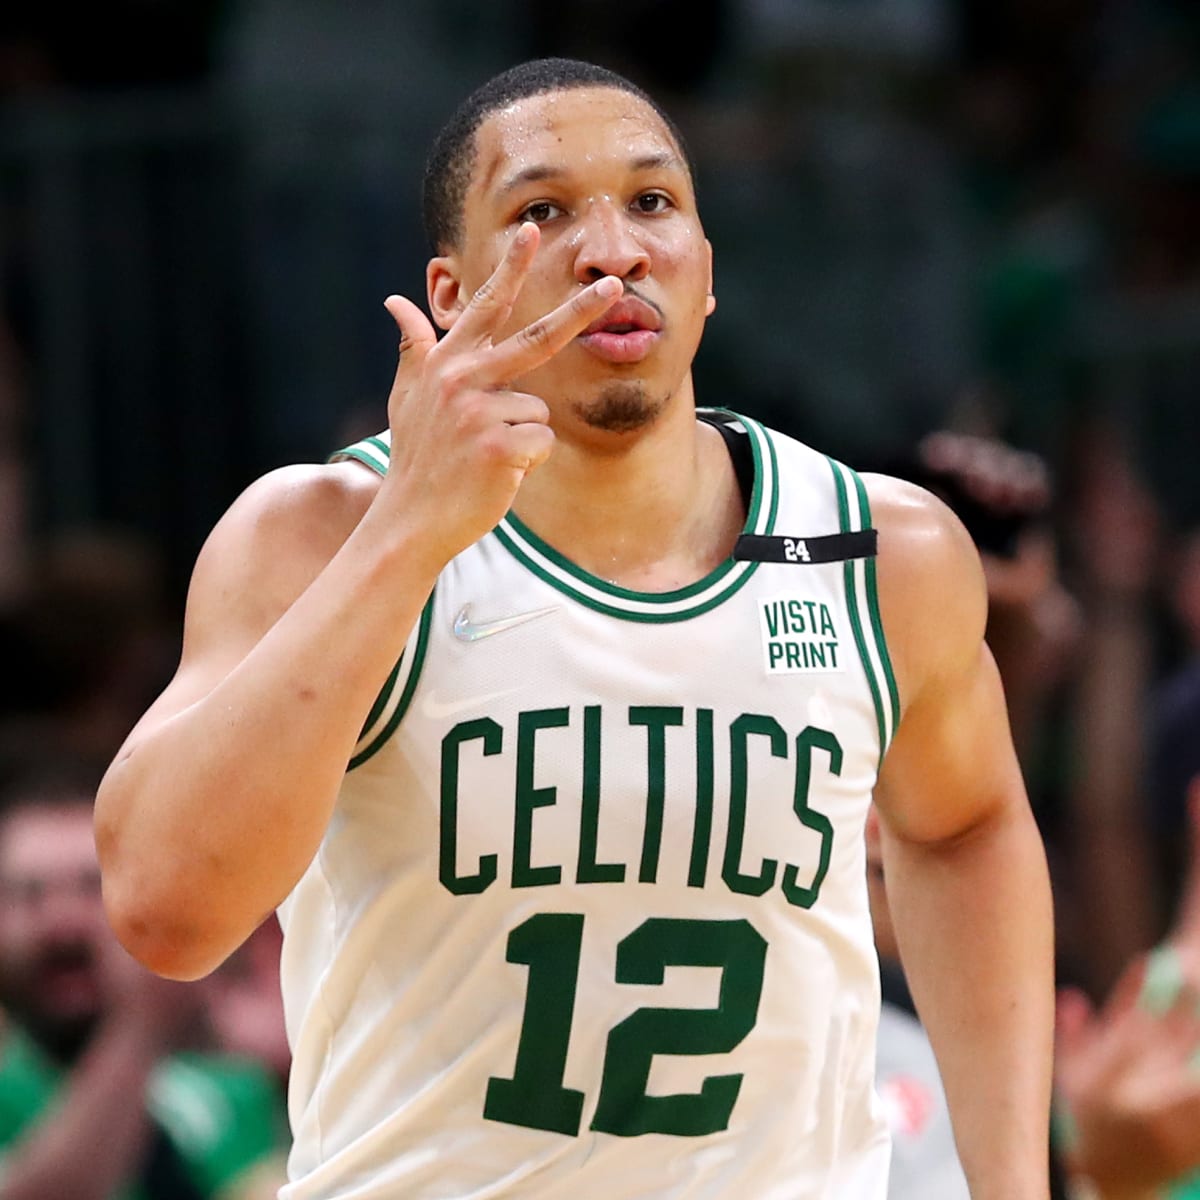 Early reactions to the Boston Celtics trading Grant Williams